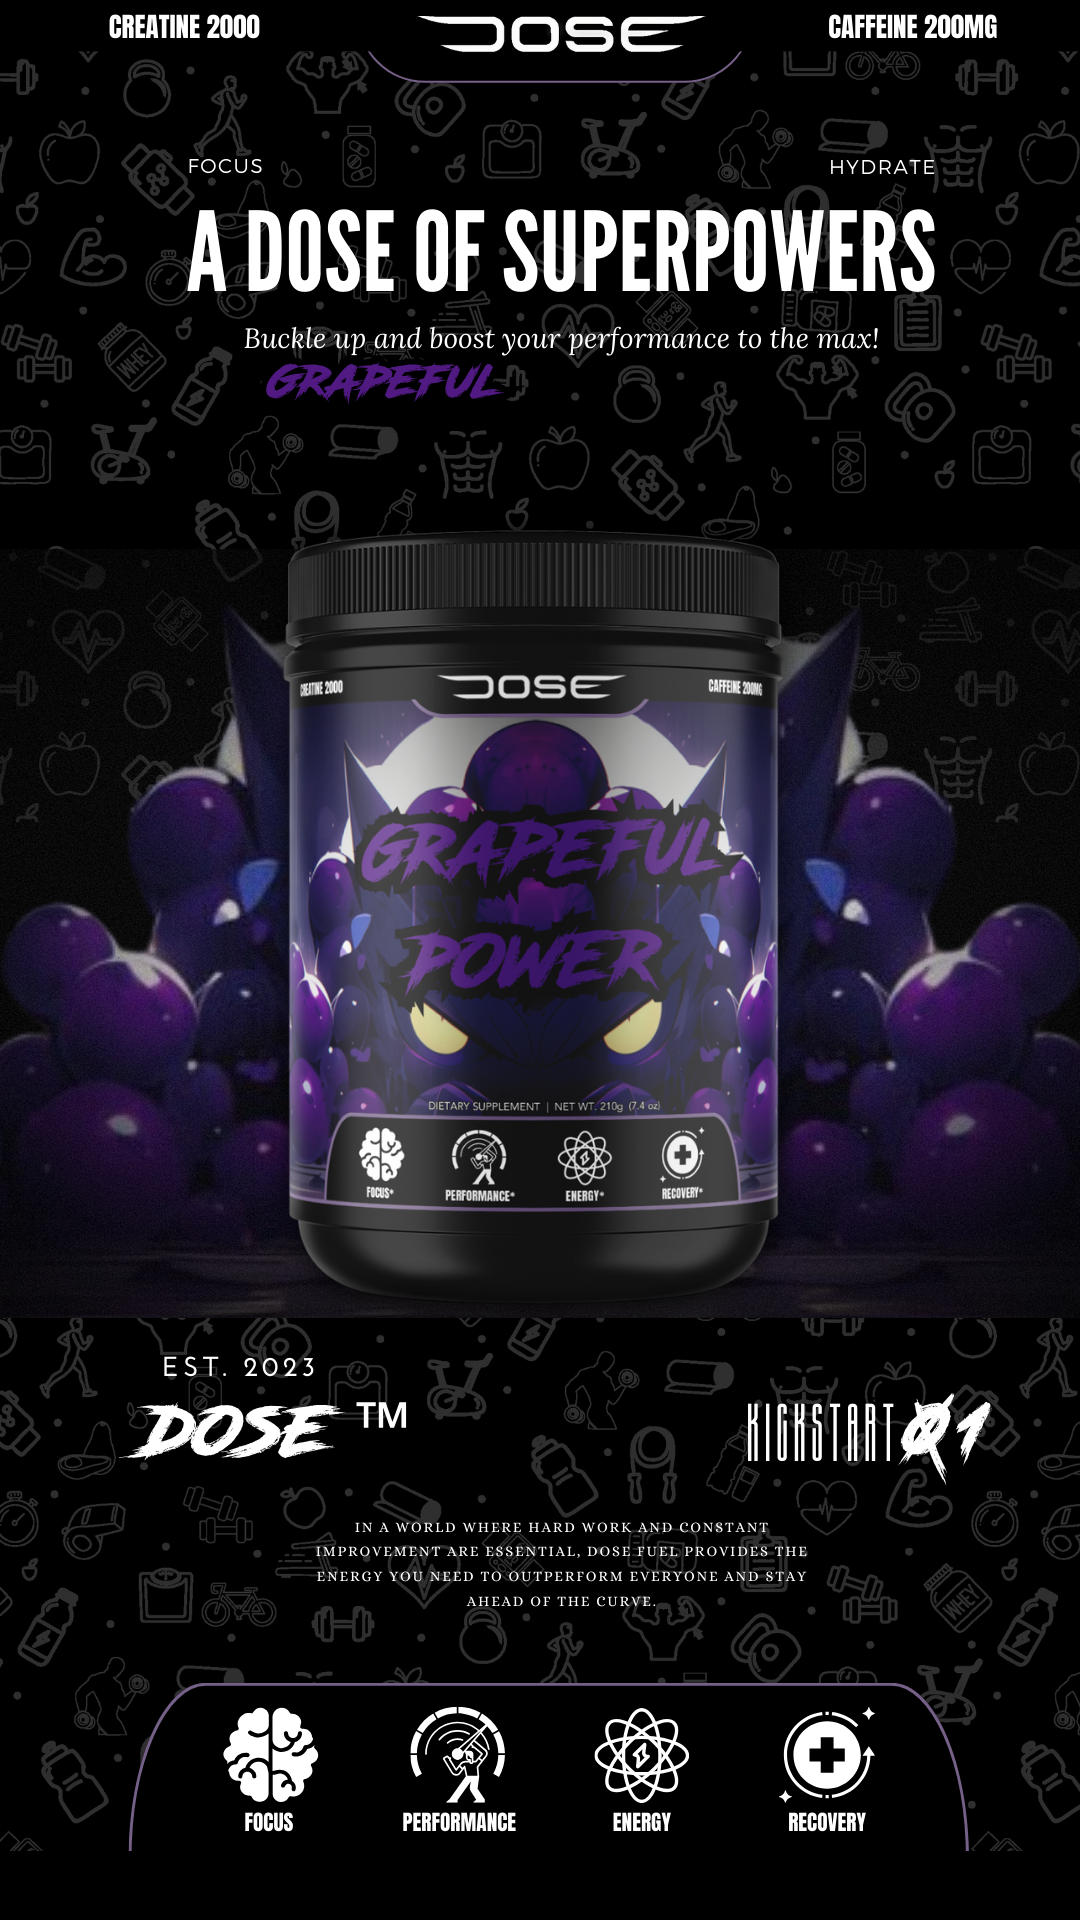 Dose Fuel Grapeful Power Pre-Workout Supplement - A Dose of Superpowers, 2000mg Creatine, 200mg Caffeine, Boost Performance, Focus, Energy, and Recovery